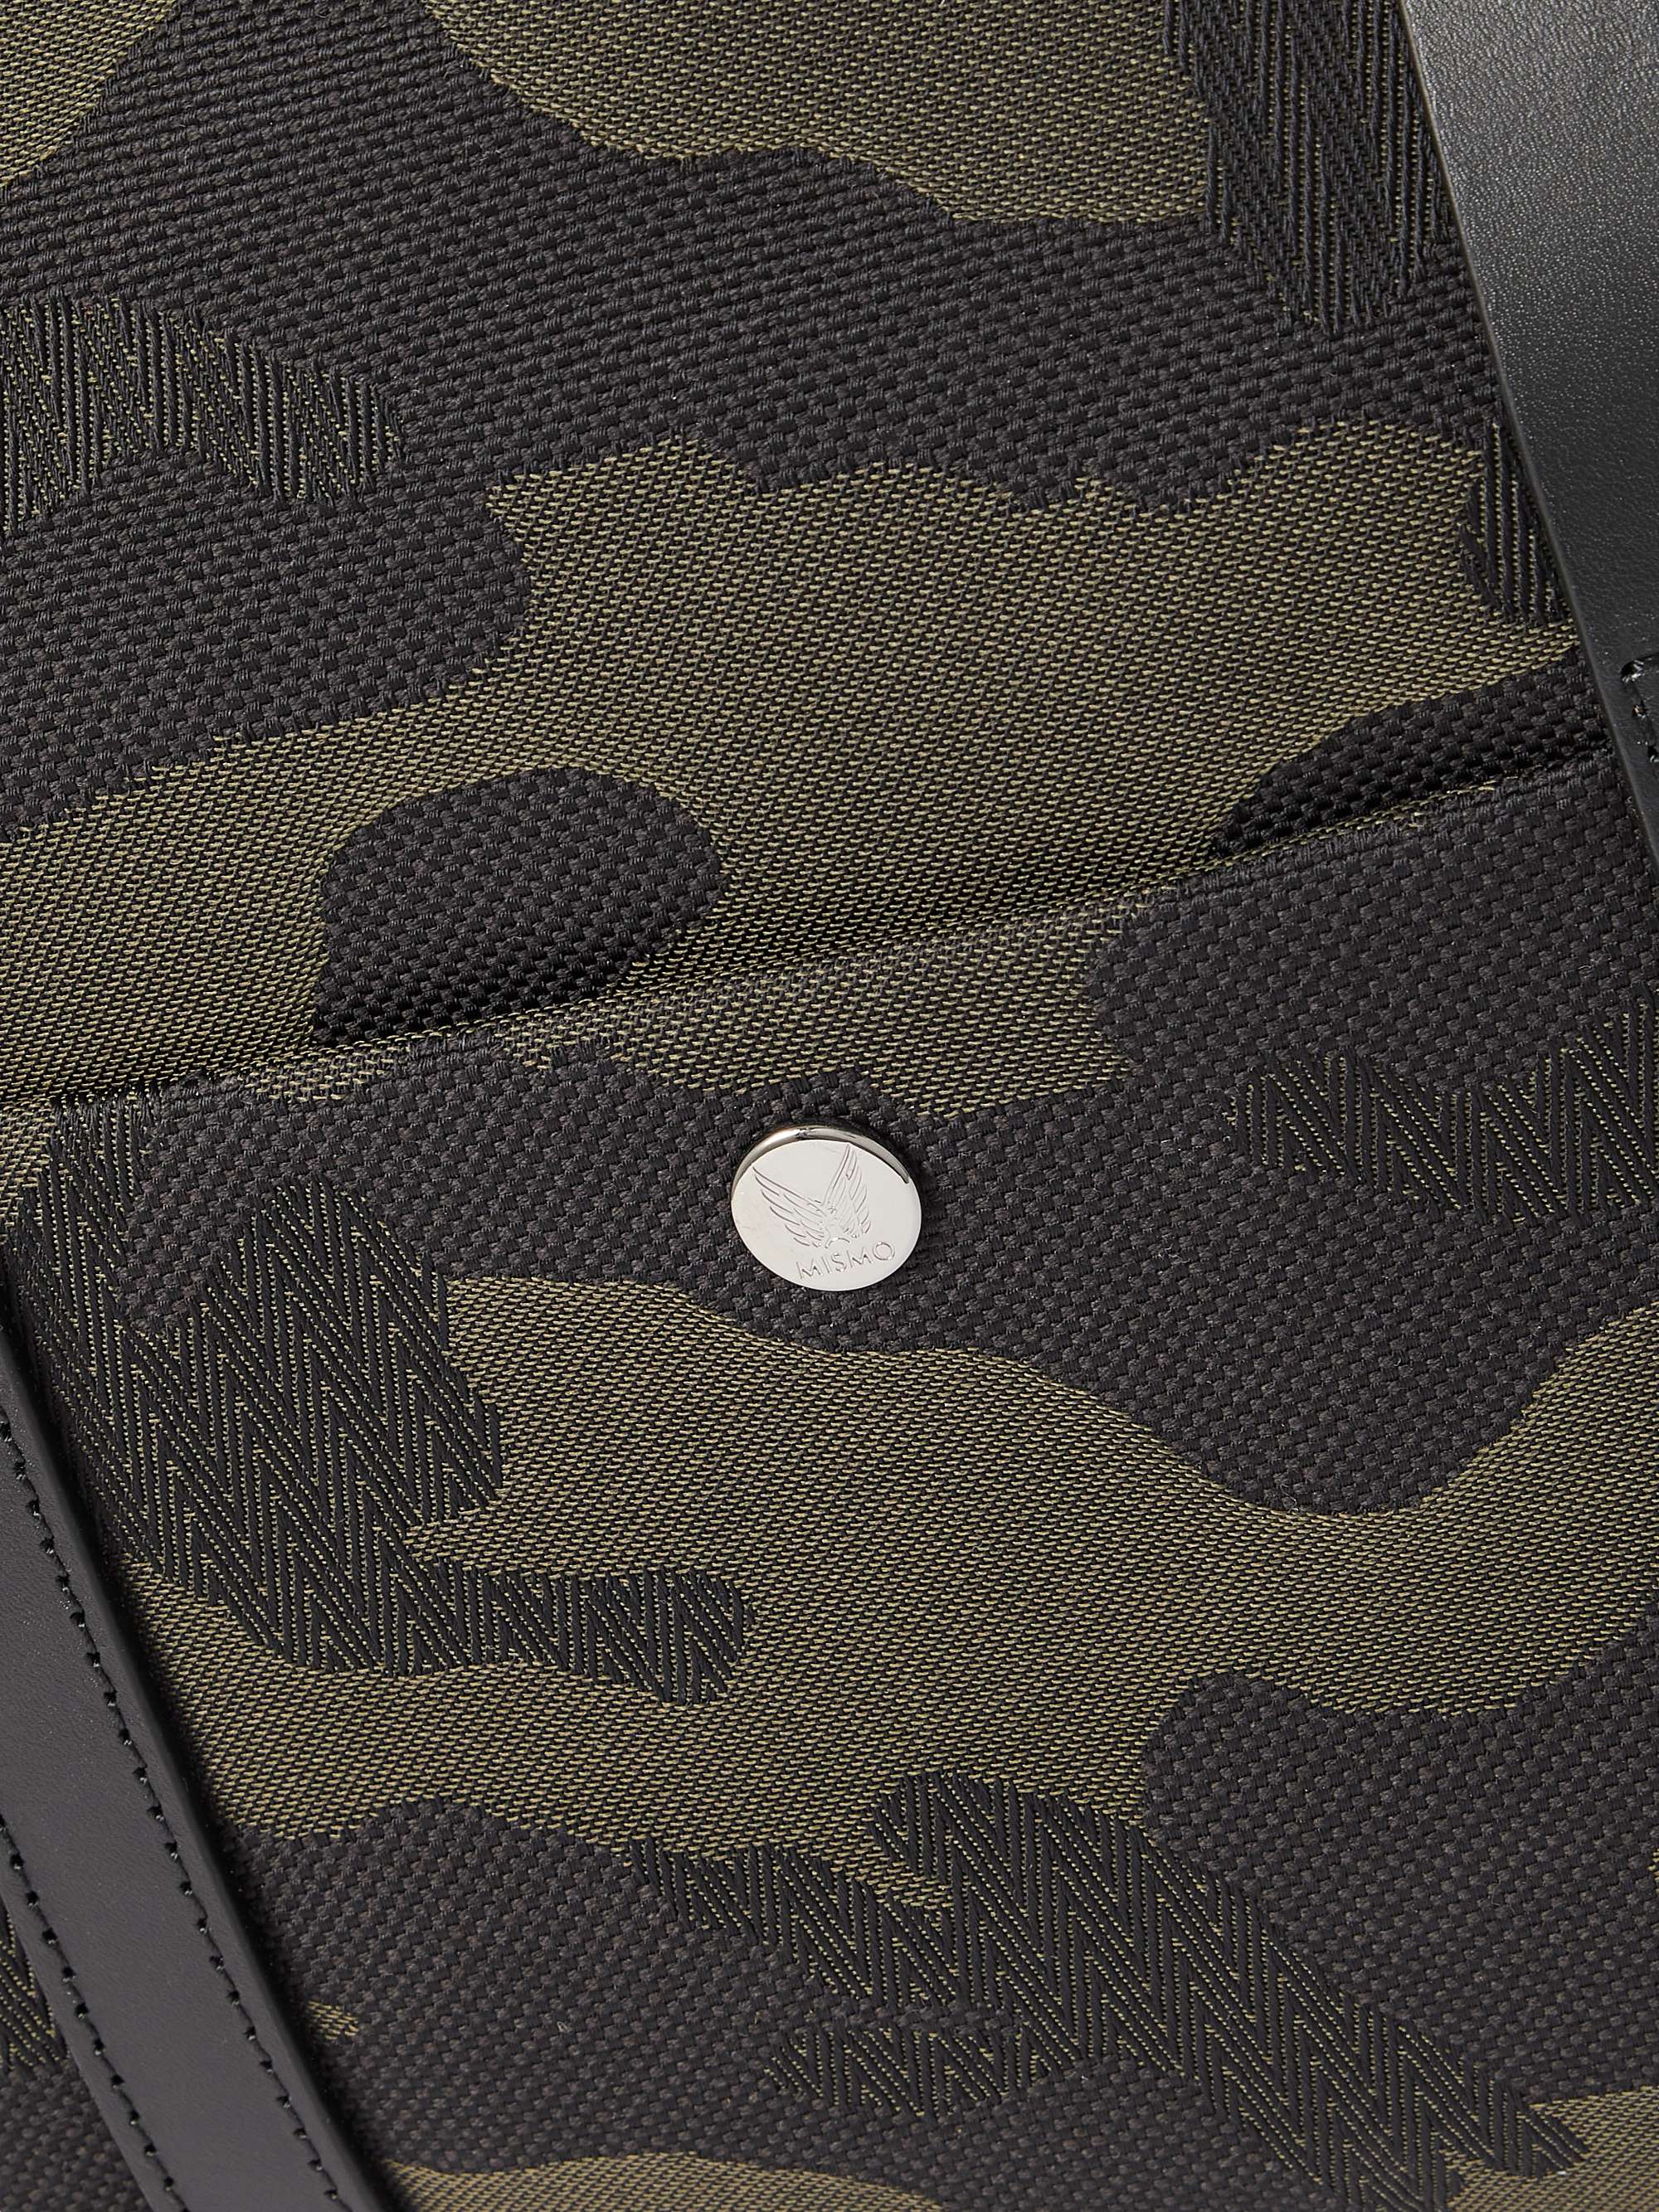 MISMO Utility Leather-Trimmed Camouflage-Jacquard Holdall